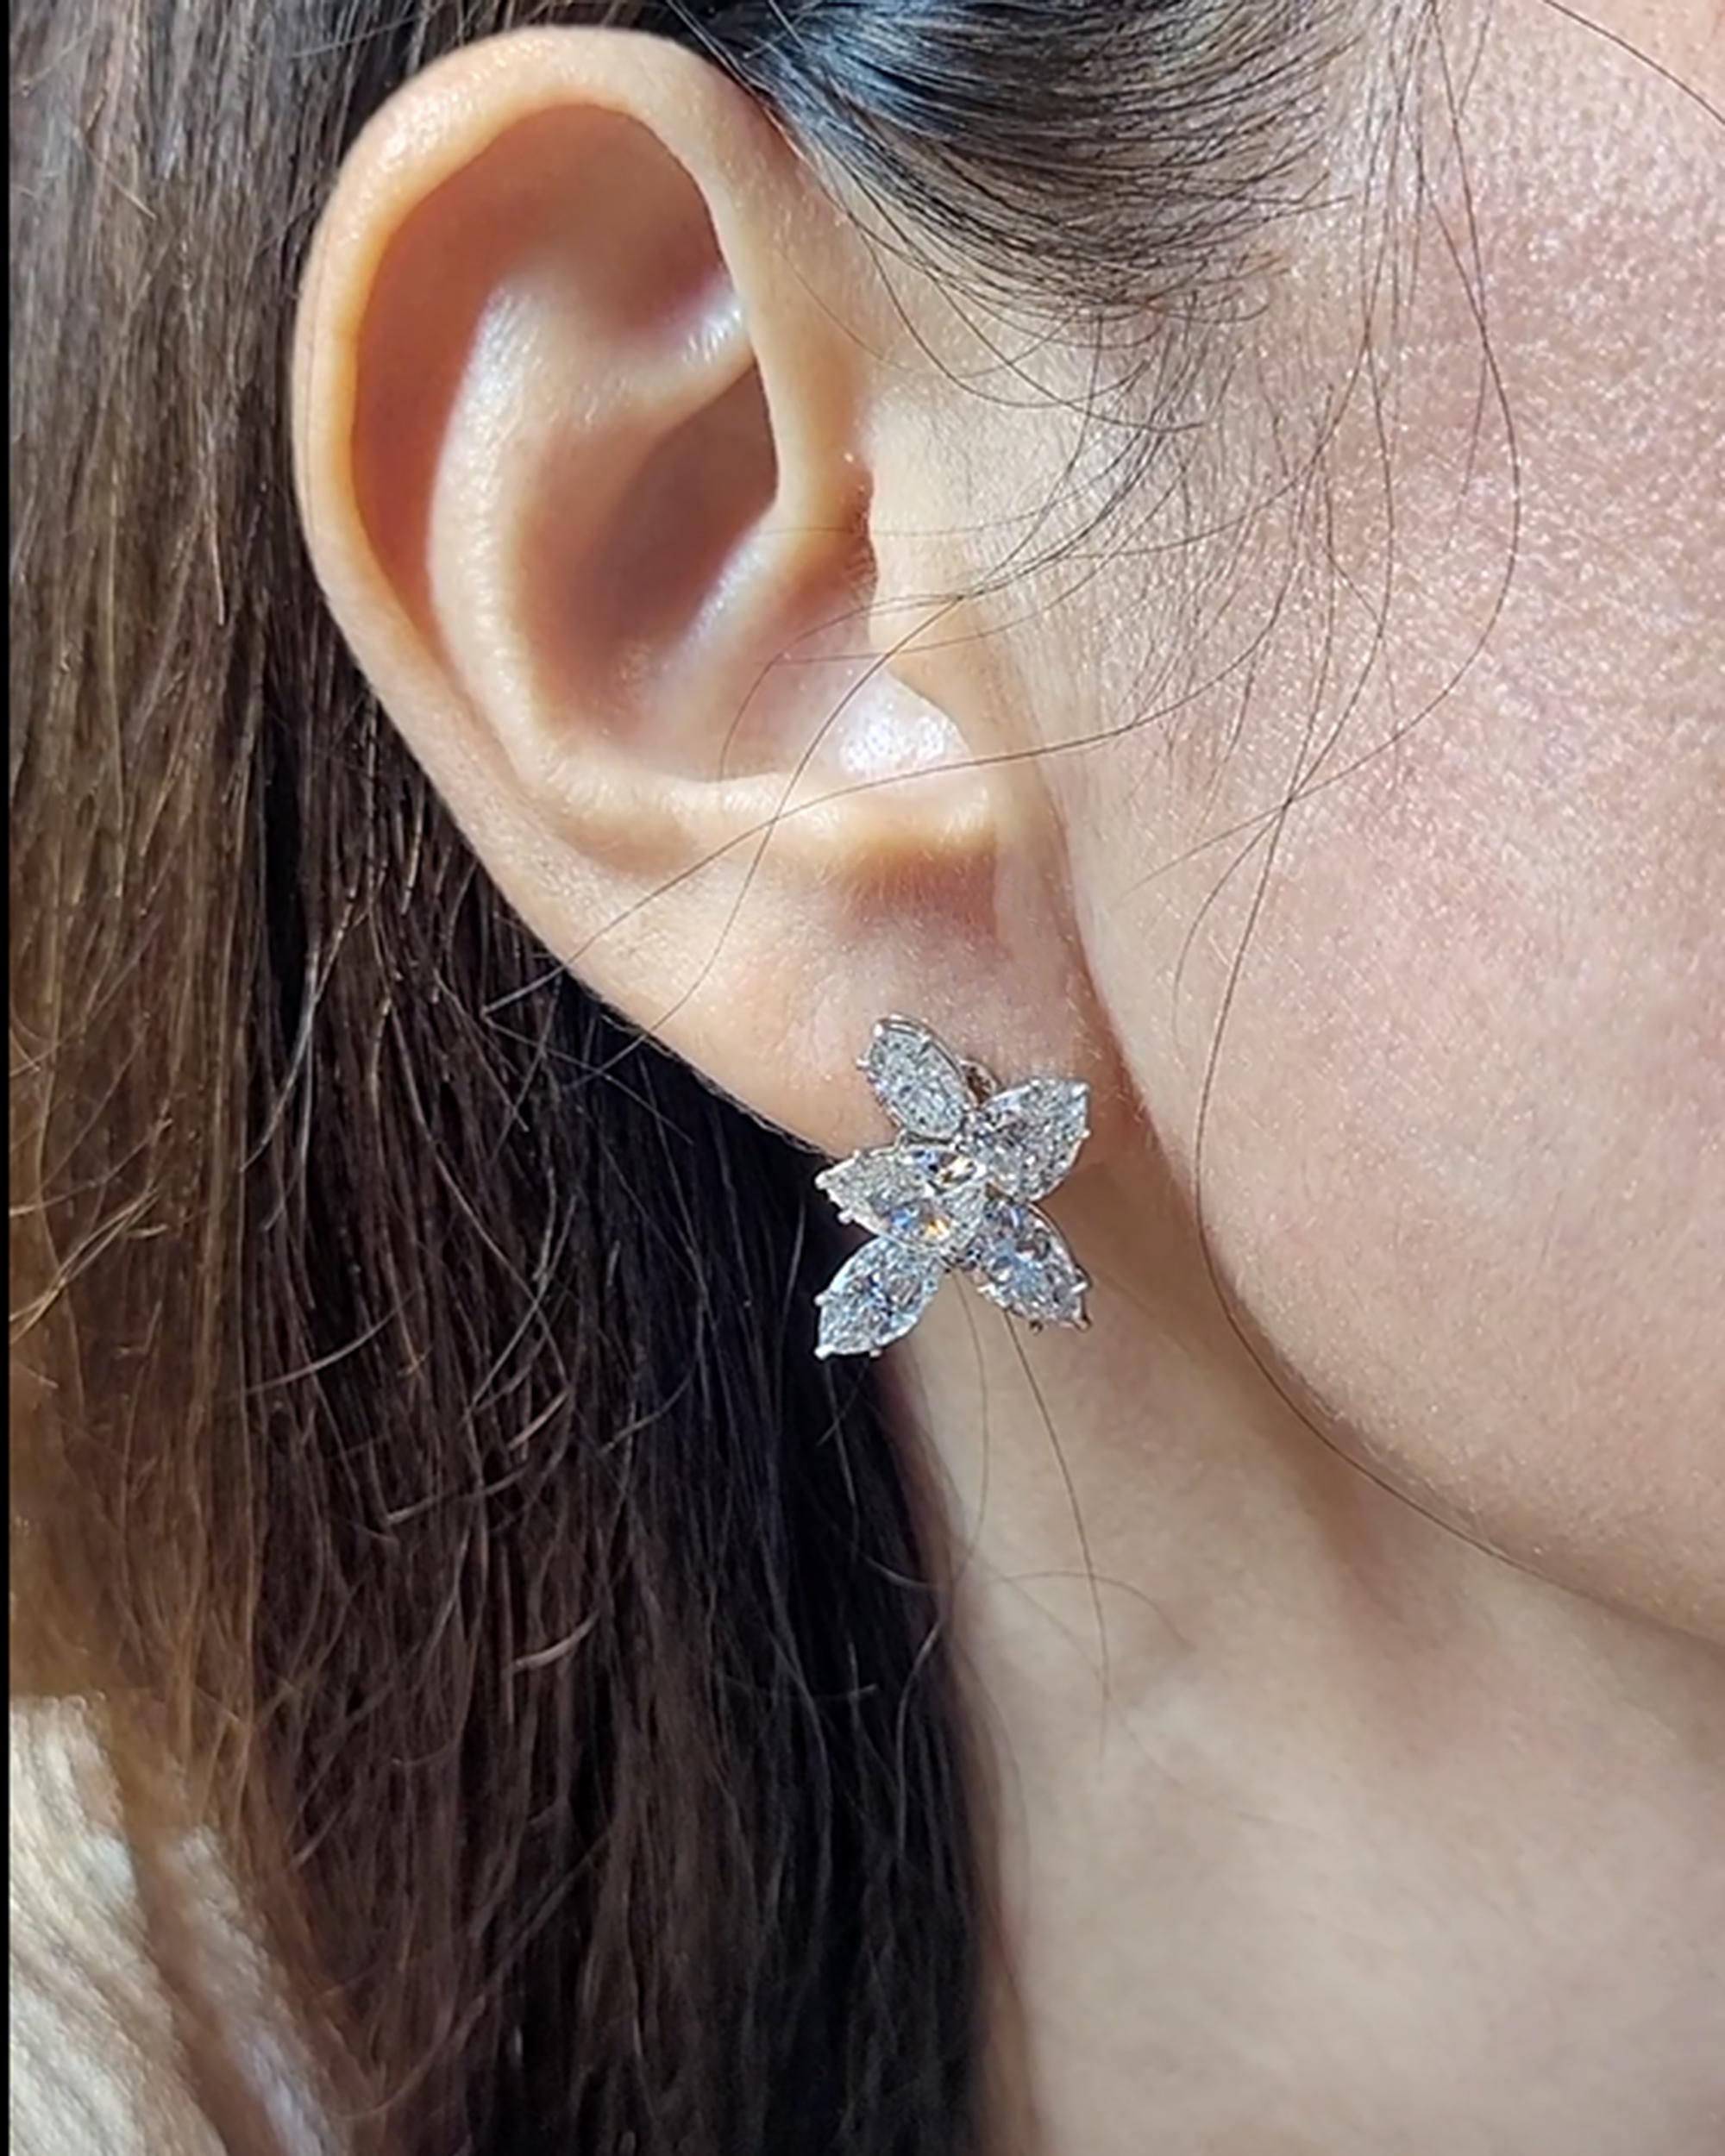 Introducing a stunning pair of diamond cluster earrings that are sure to captivate anyone's attention. These earrings feature a dazzling combination of marquise and pear-shaped diamonds that create a truly breathtaking effect.

The earrings boast a